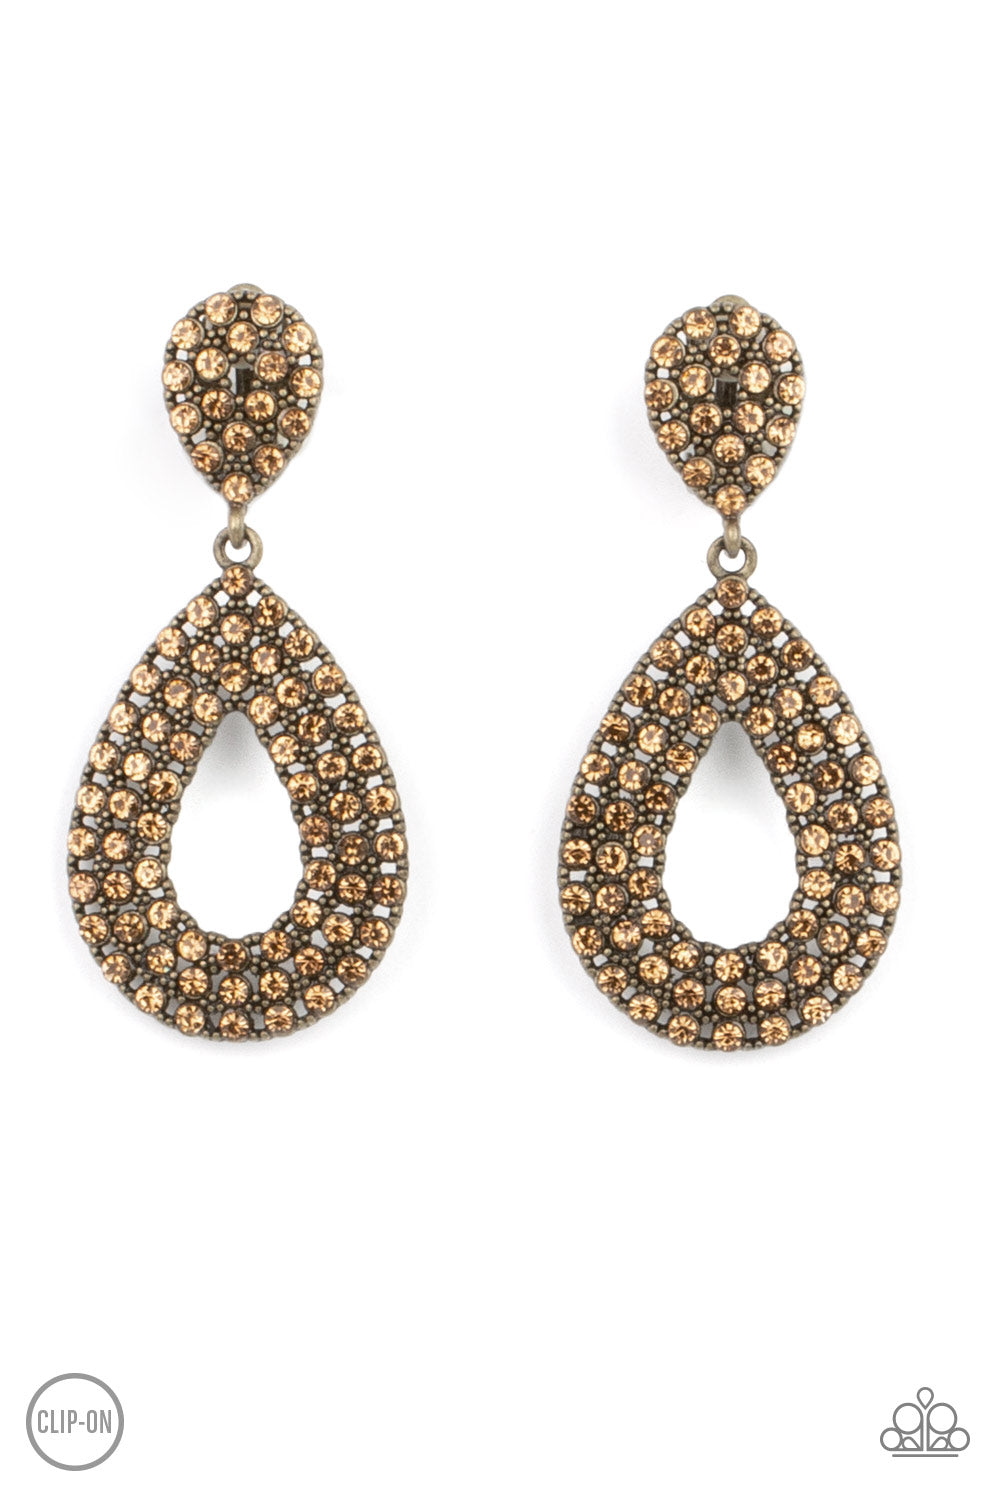 Pack In The Pizzazz Brass Clip-On Earring - Paparazzi Accessories  A topaz rhinestone encrusted silhouette teardrop attaches to the bottom of a dainty topaz rhinestone encrusted teardrop, creating a glamorous lure. Earring attaches to a standard clip-on fitting.  All Paparazzi Accessories are lead free and nickel free!  Sold as one pair of clip-on earrings.